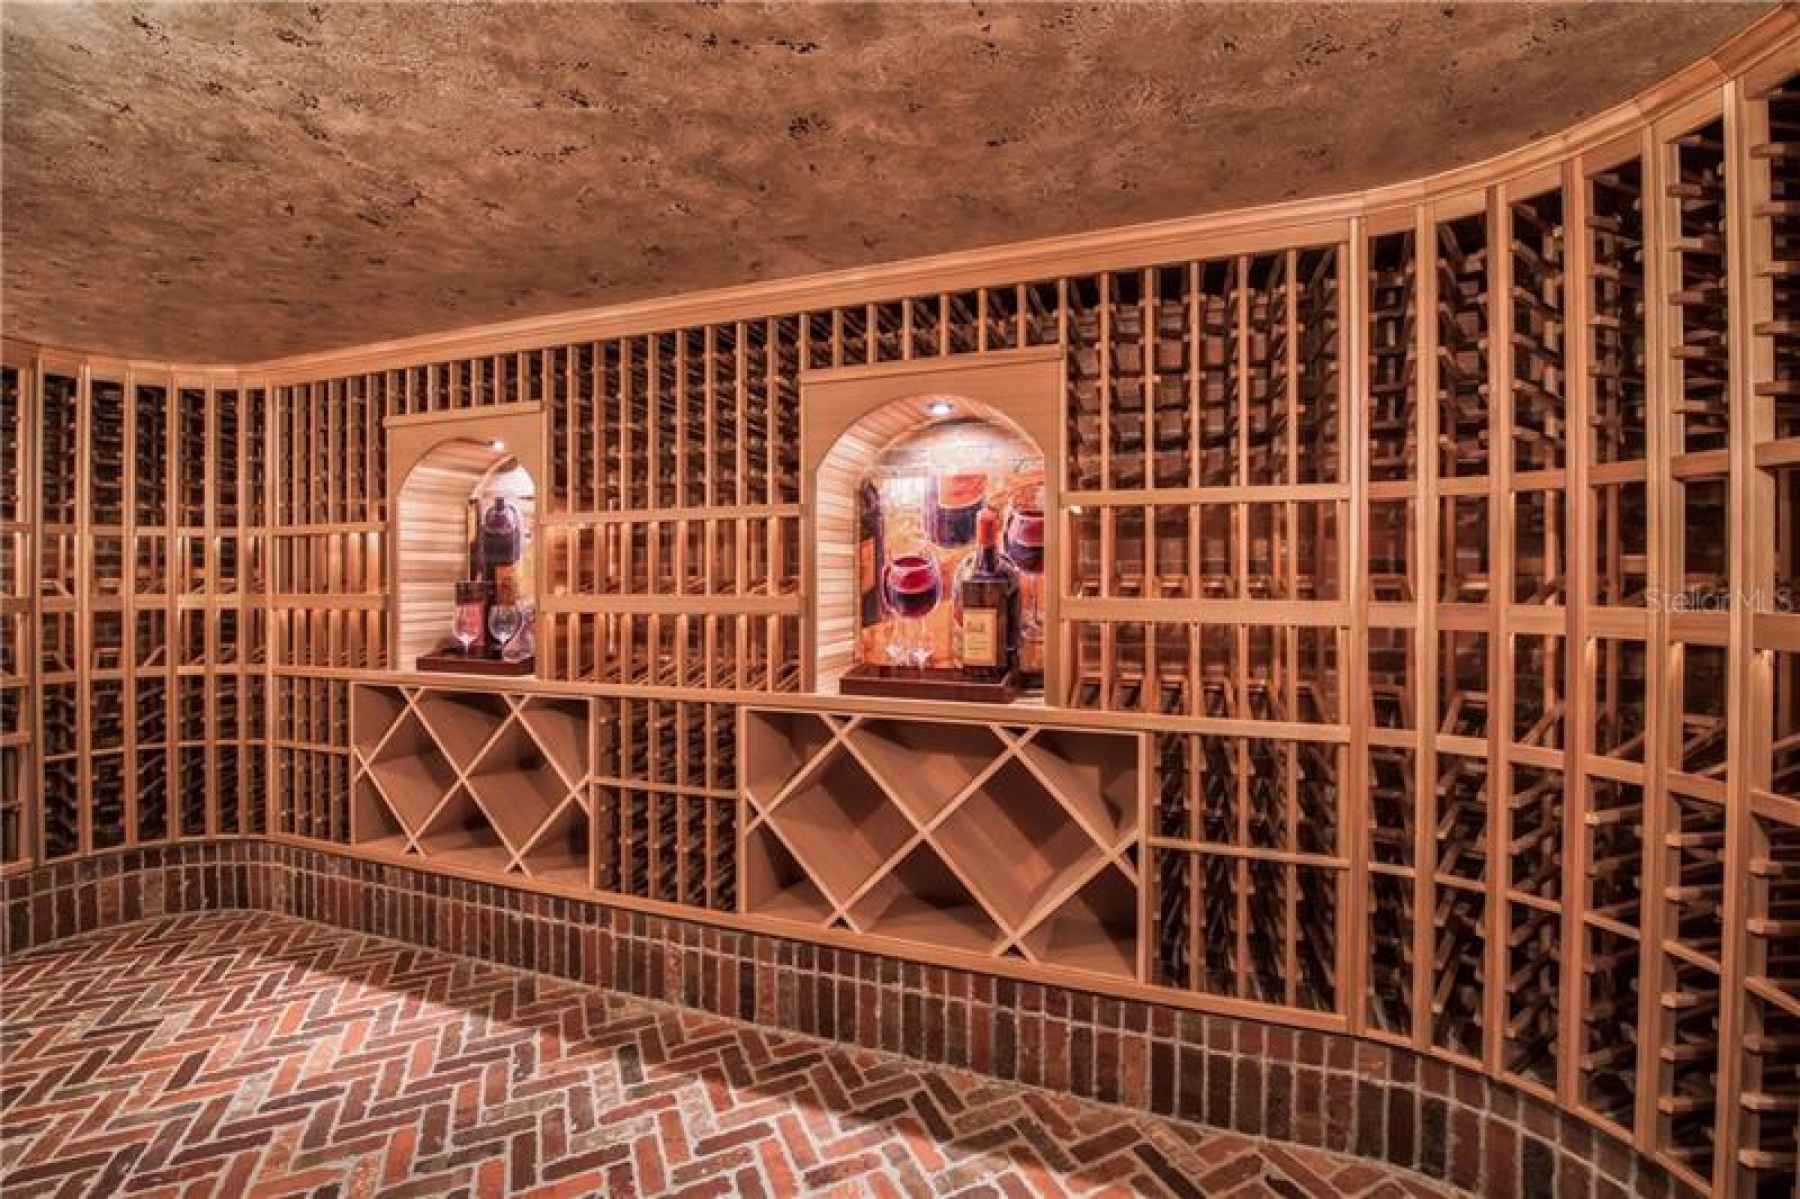 Hold over 10,000 Bottles in Chilled Wine Room